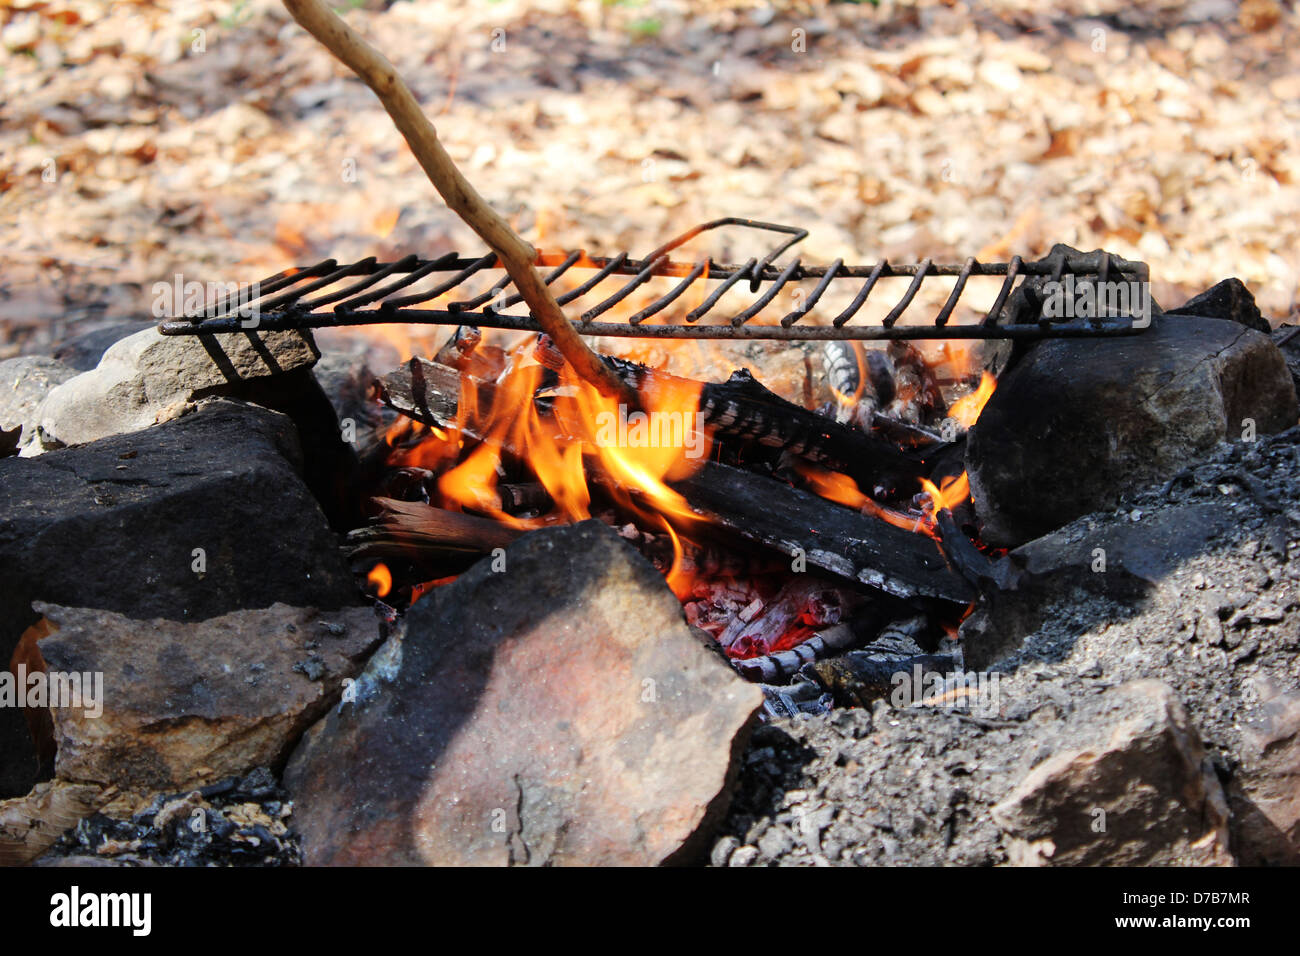 Barbecue fire BBQ coal fire iron grill Stock Photo